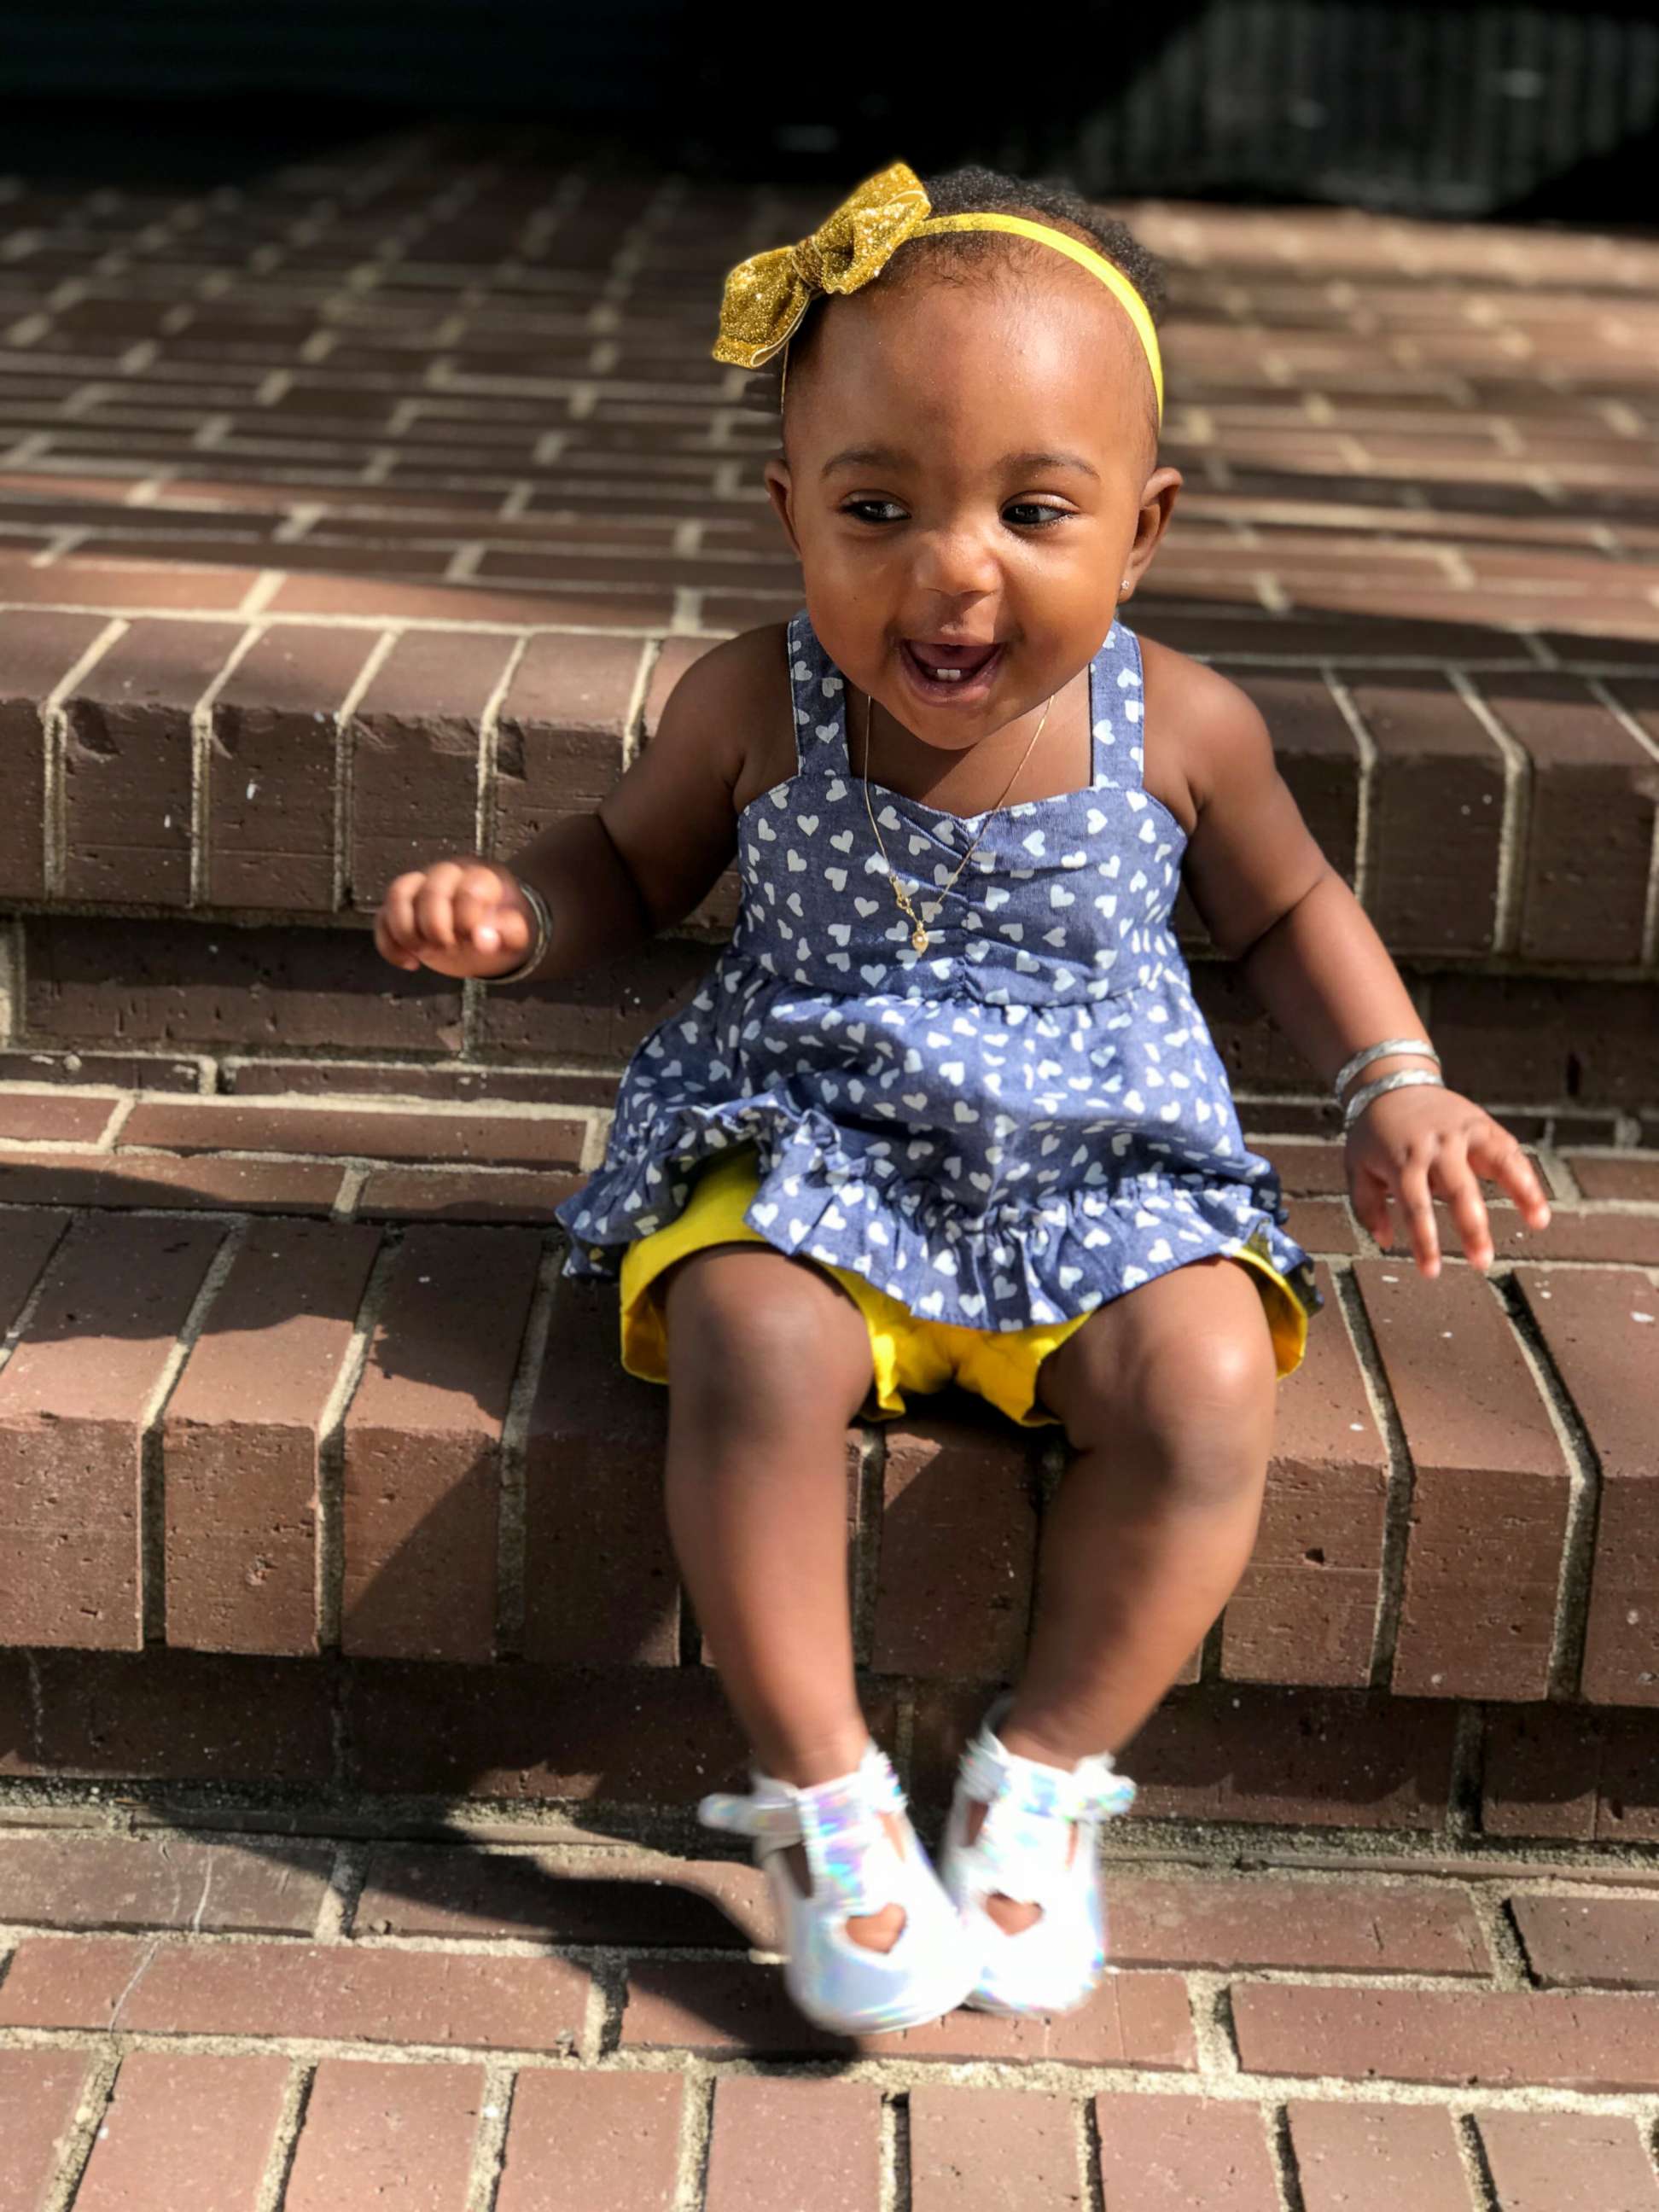 PHOTO: 11-month-old Jisele Bell's first steps went viral in a Oct. 13 video on Instagram, earning more than 63,000 views.